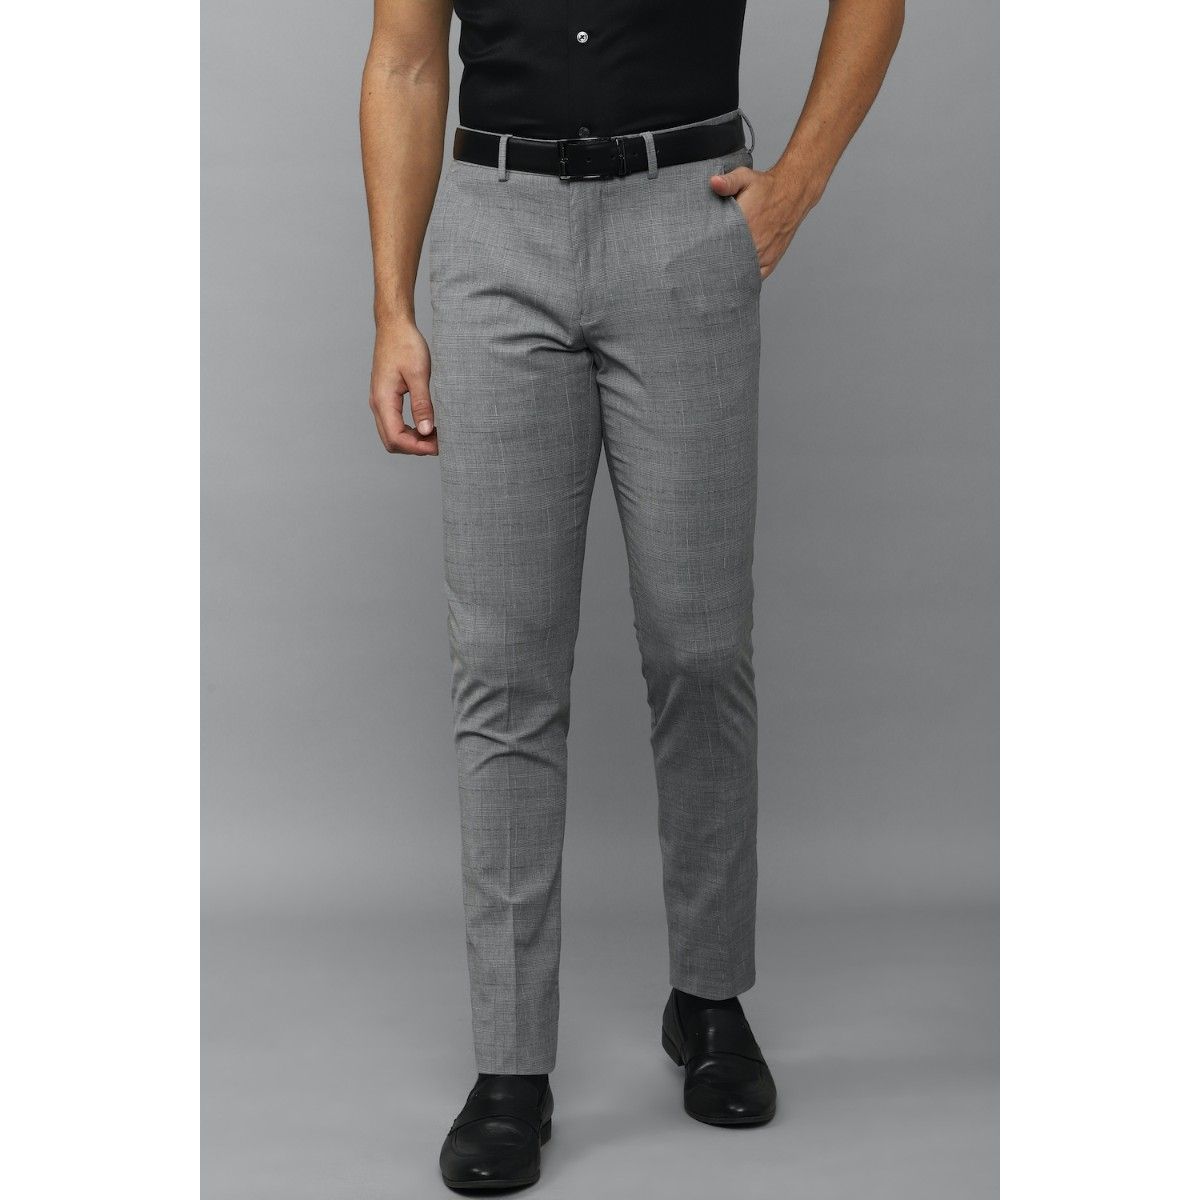 LOUIS PHILIPPE Slim Fit Men White Trousers - Buy LOUIS PHILIPPE Slim Fit  Men White Trousers Online at Best Prices in India | Flipkart.com